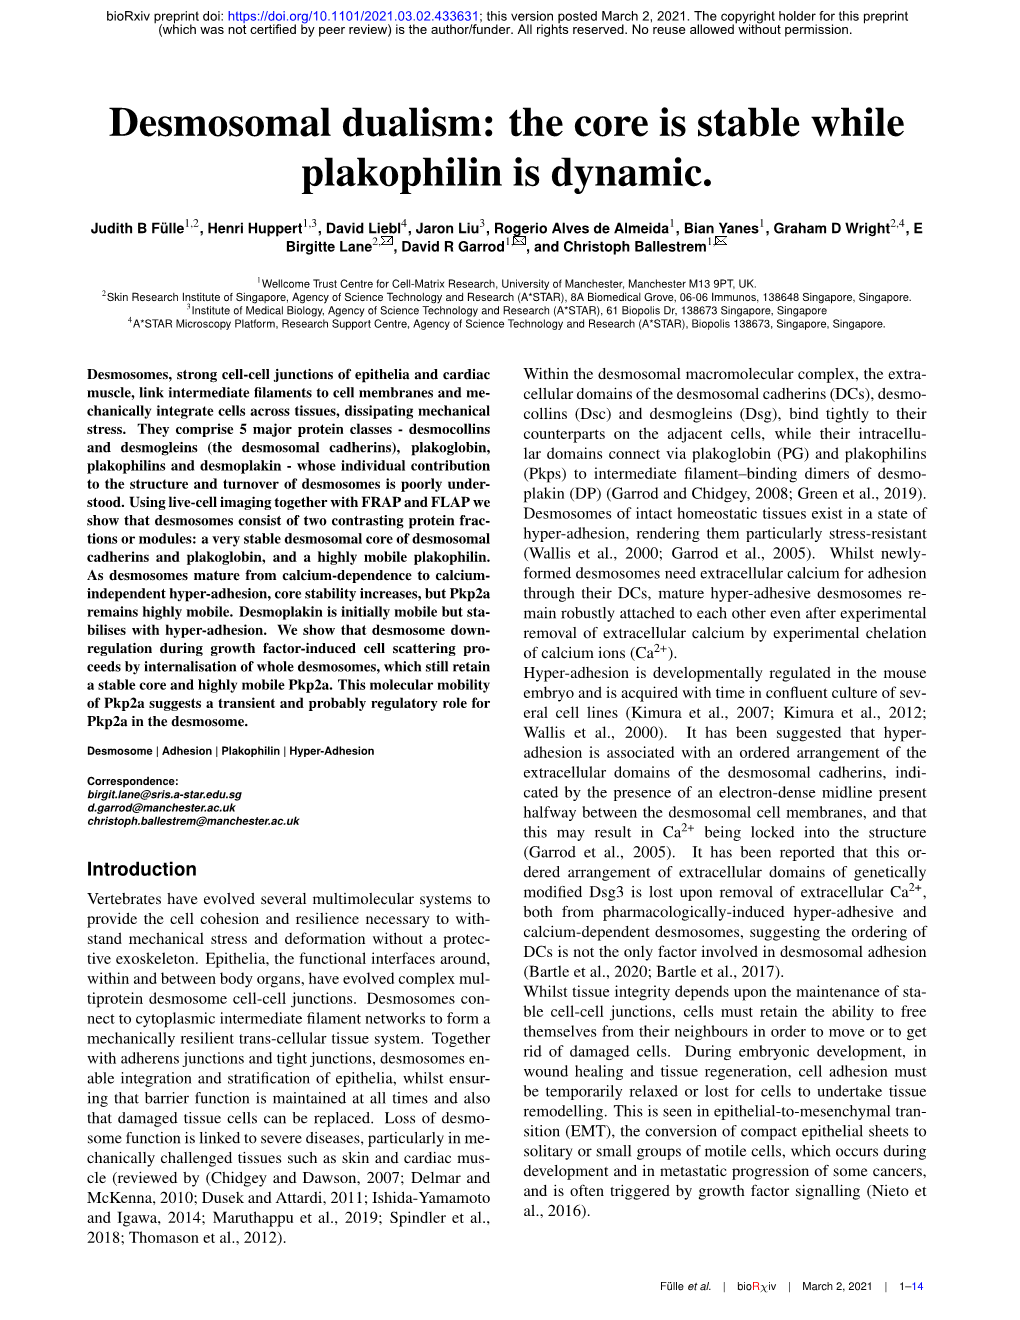 Desmosomal Dualism: the Core Is Stable While Plakophilin Is Dynamic